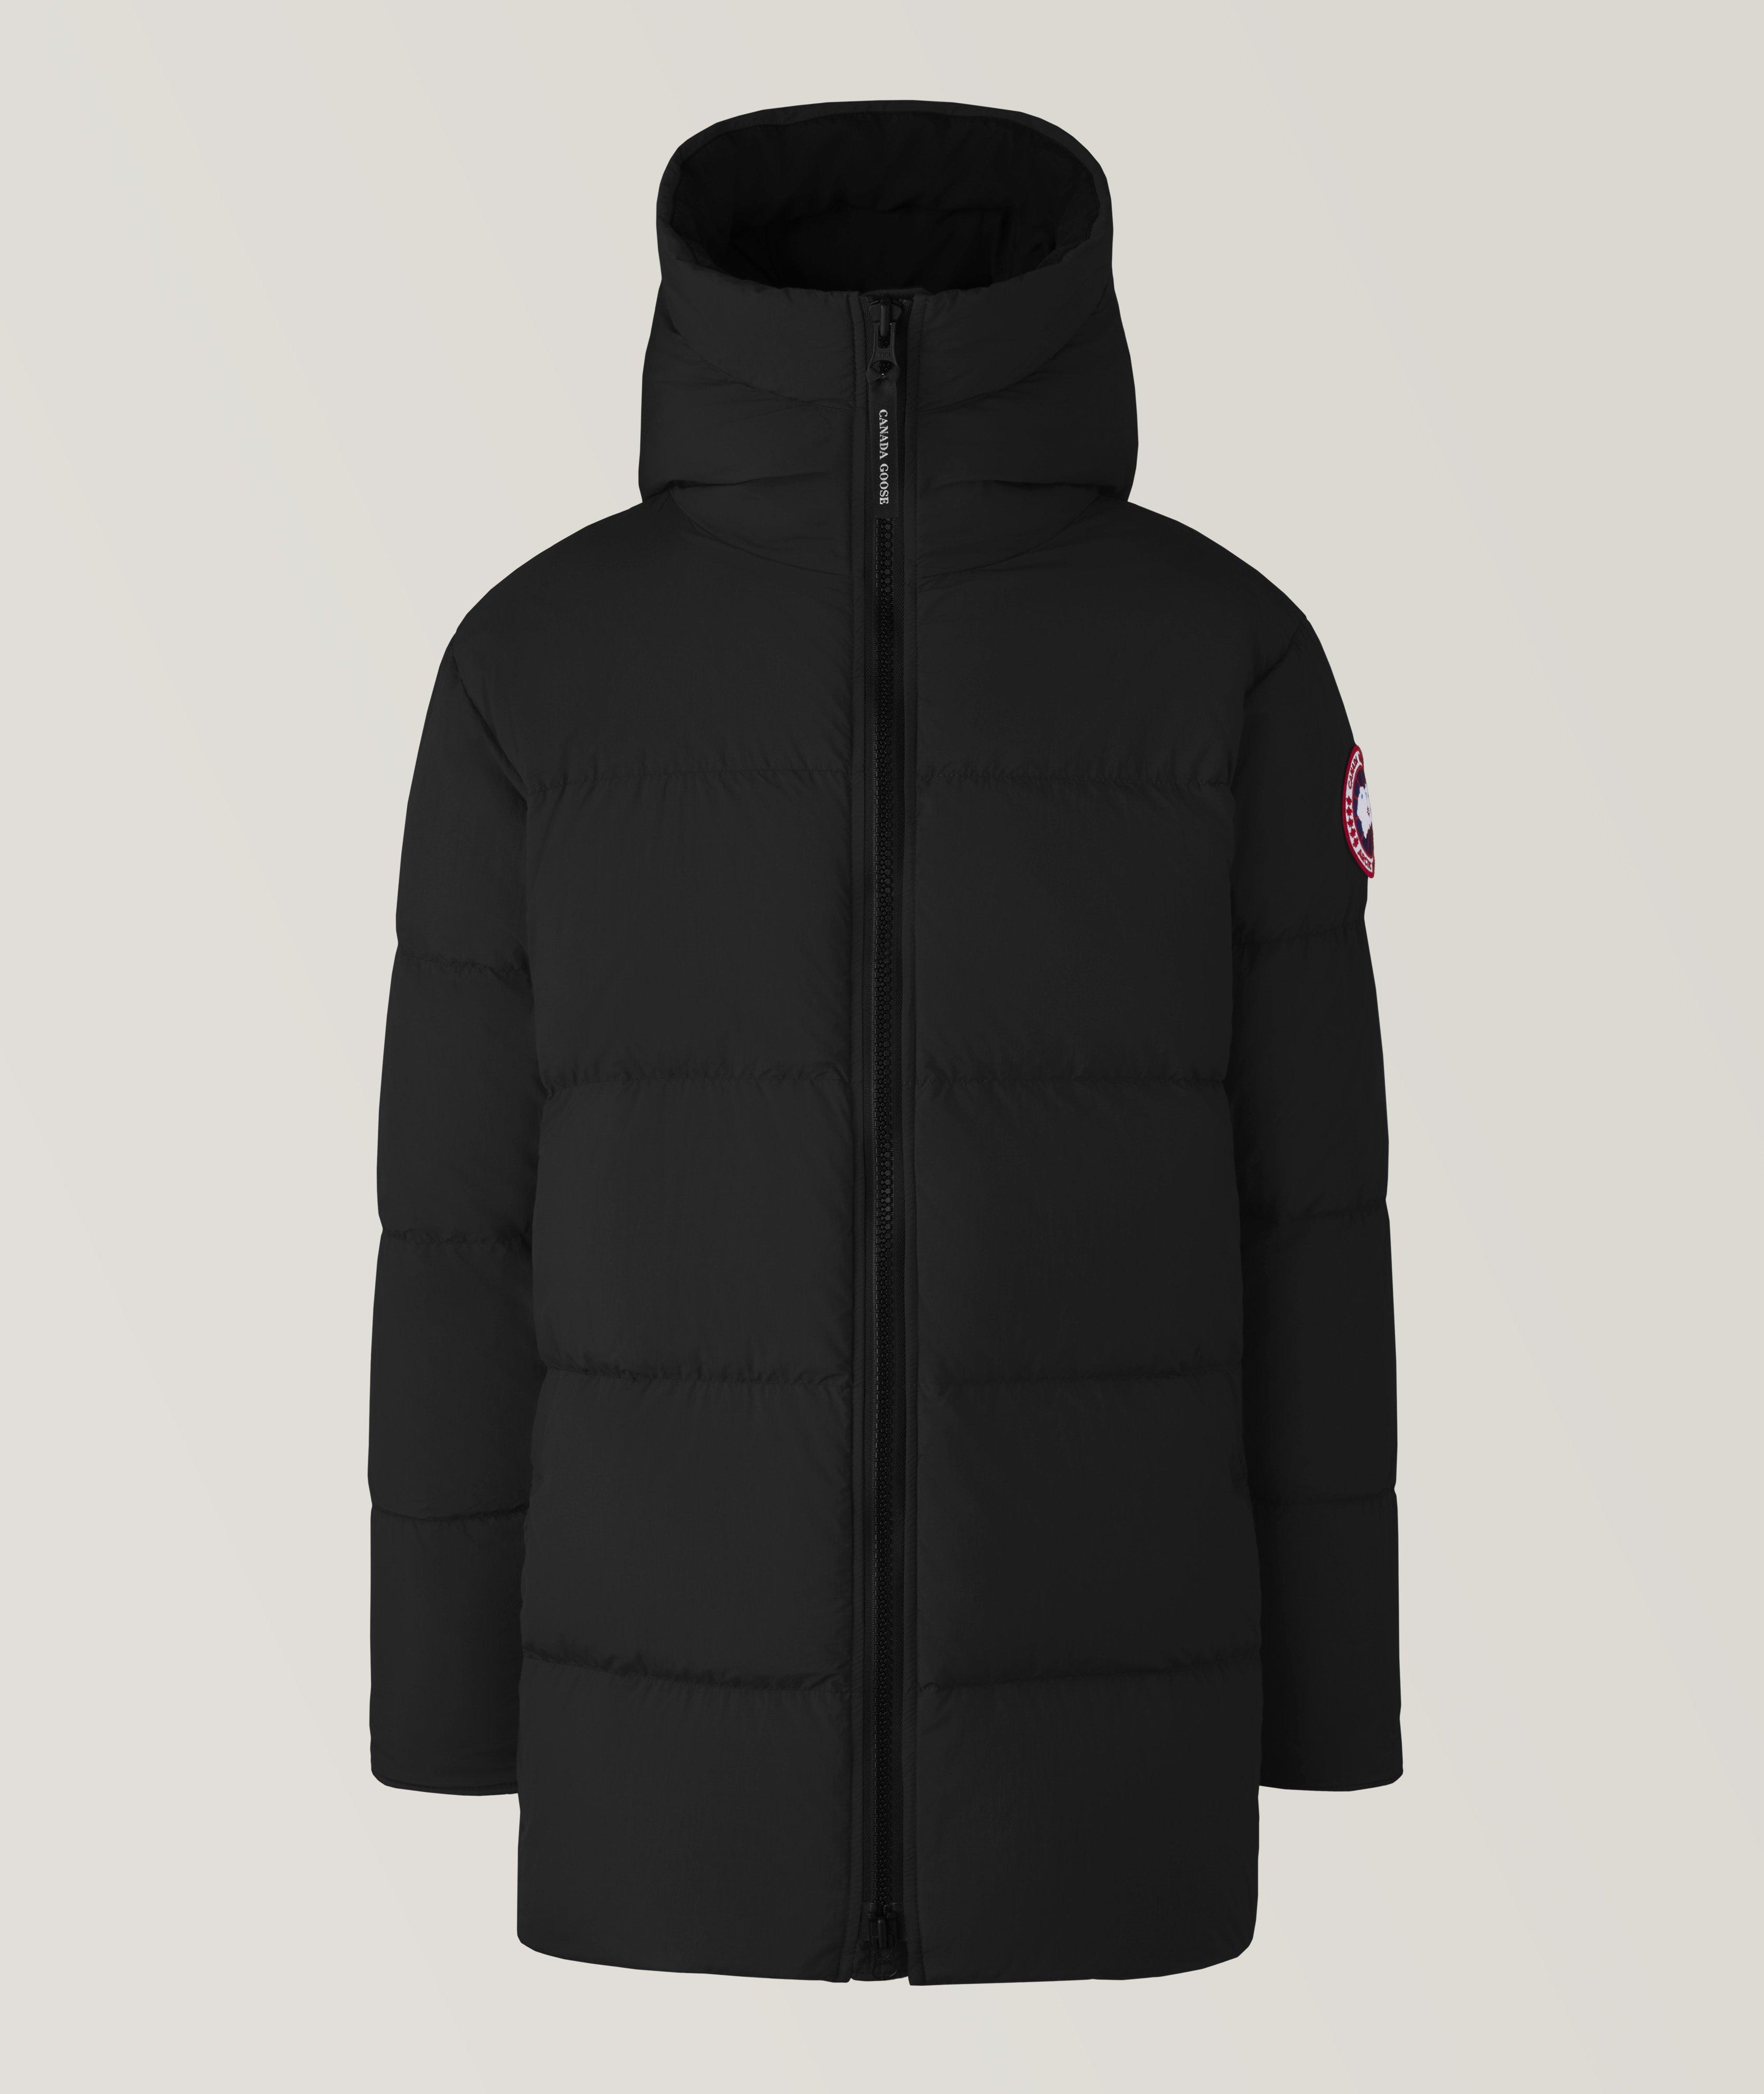 A Canada Goose Parka Is Worth It: Here's Why